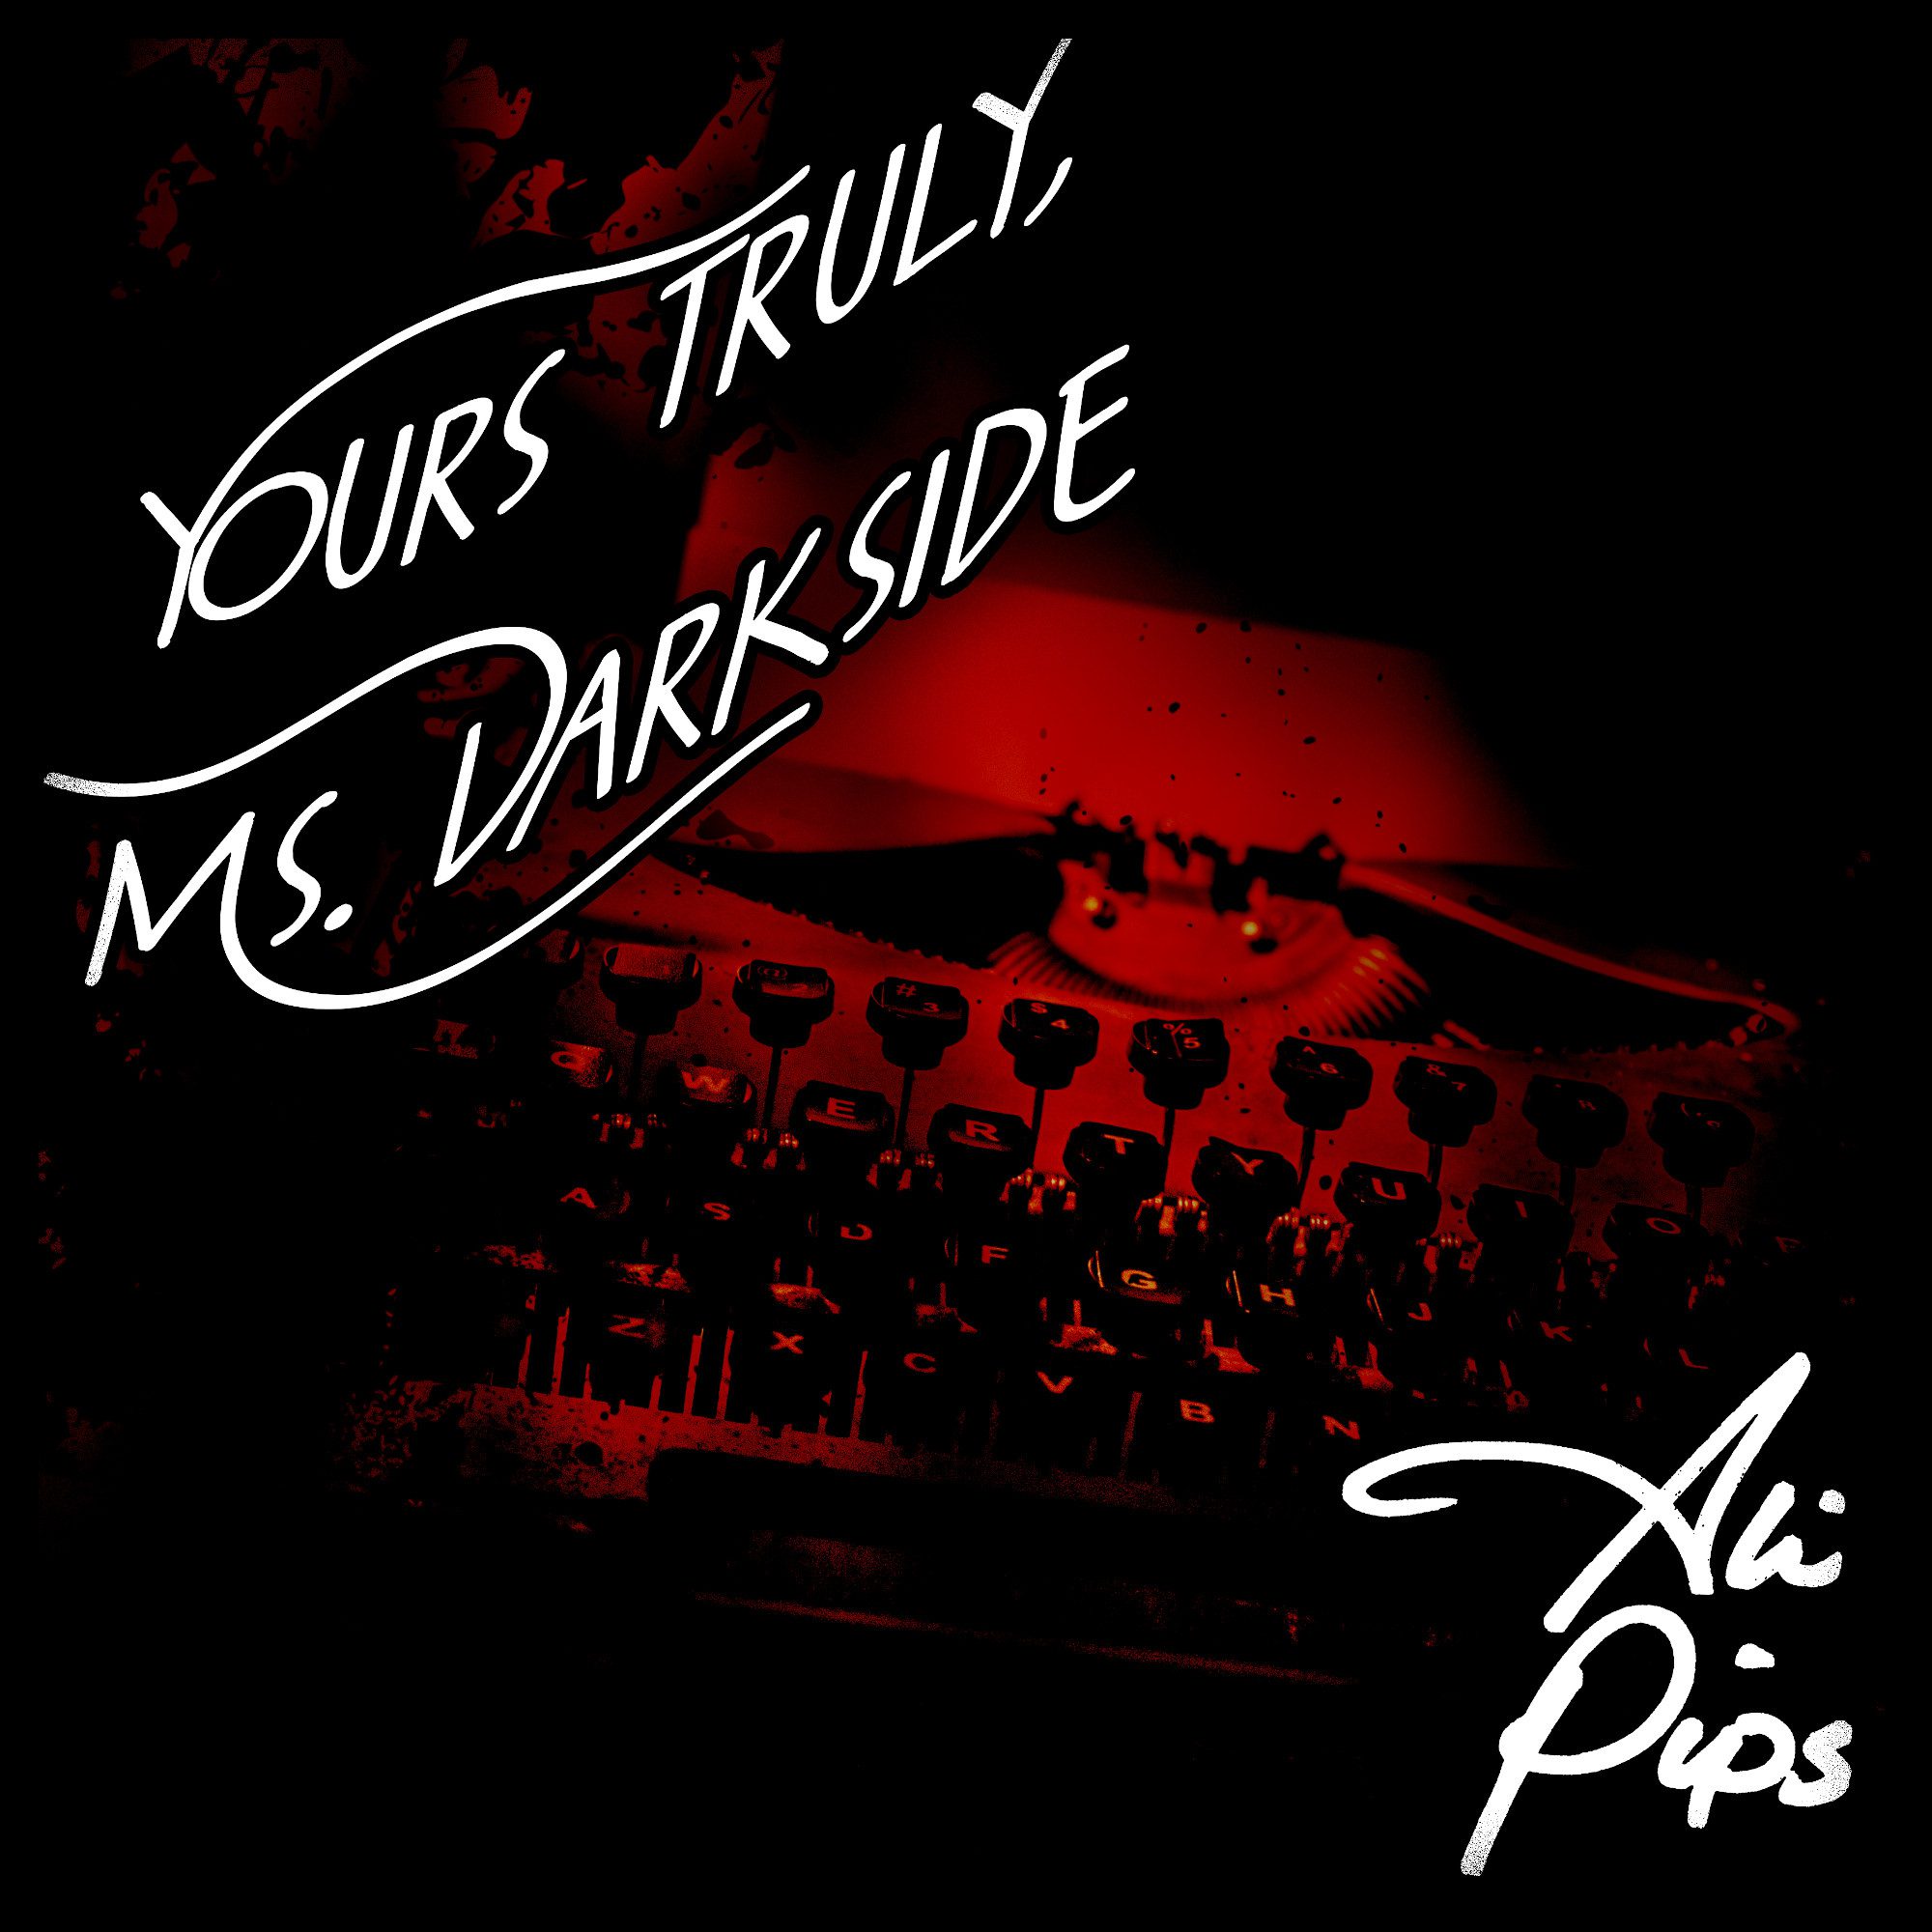 Ali Pips Yours Truly Ms Darkside 2021 The Other Side Reviews